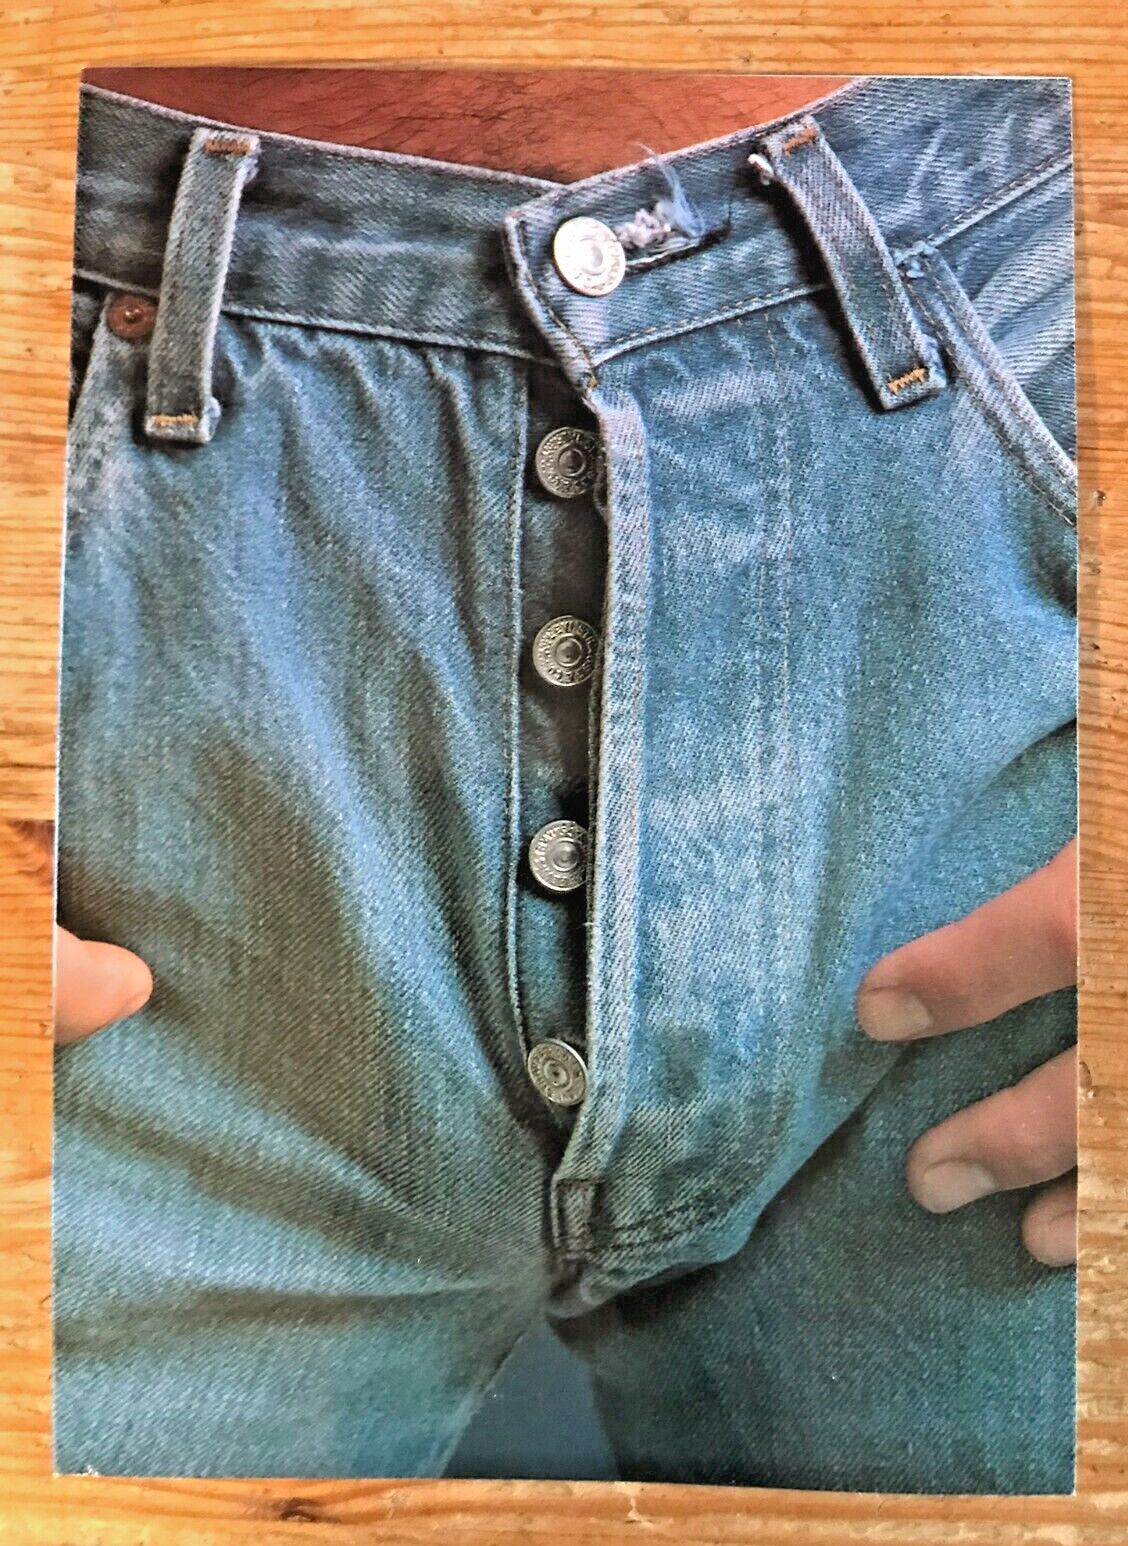 Beefcake Greeting Card Unbuttoned Jeans Package 1985 Hot Guy Man Gay Interest